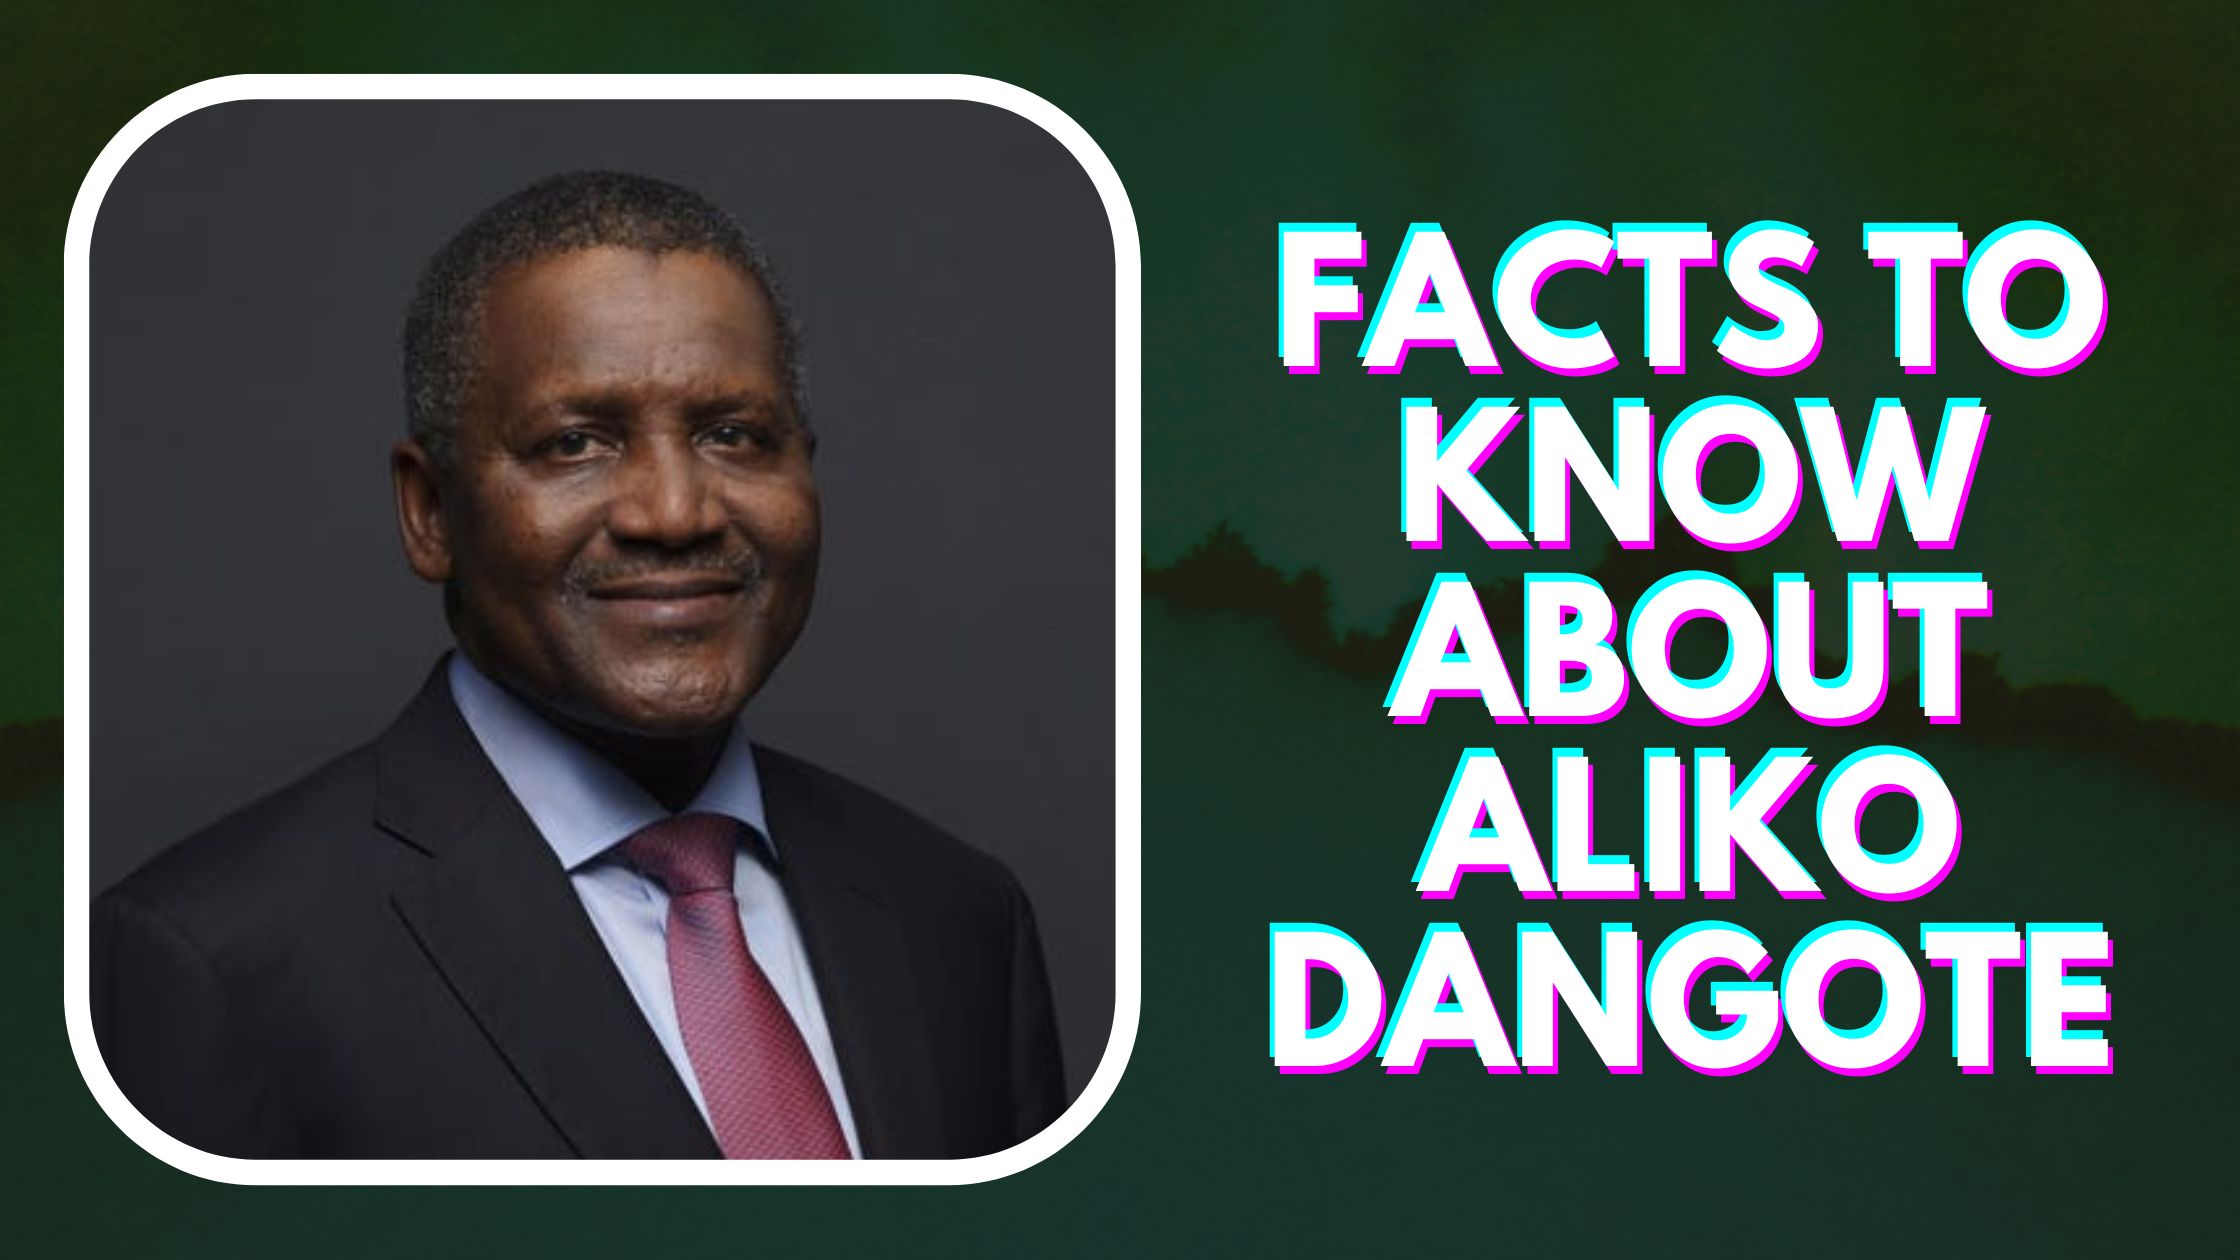 Facts To Know About Aliko Dangote